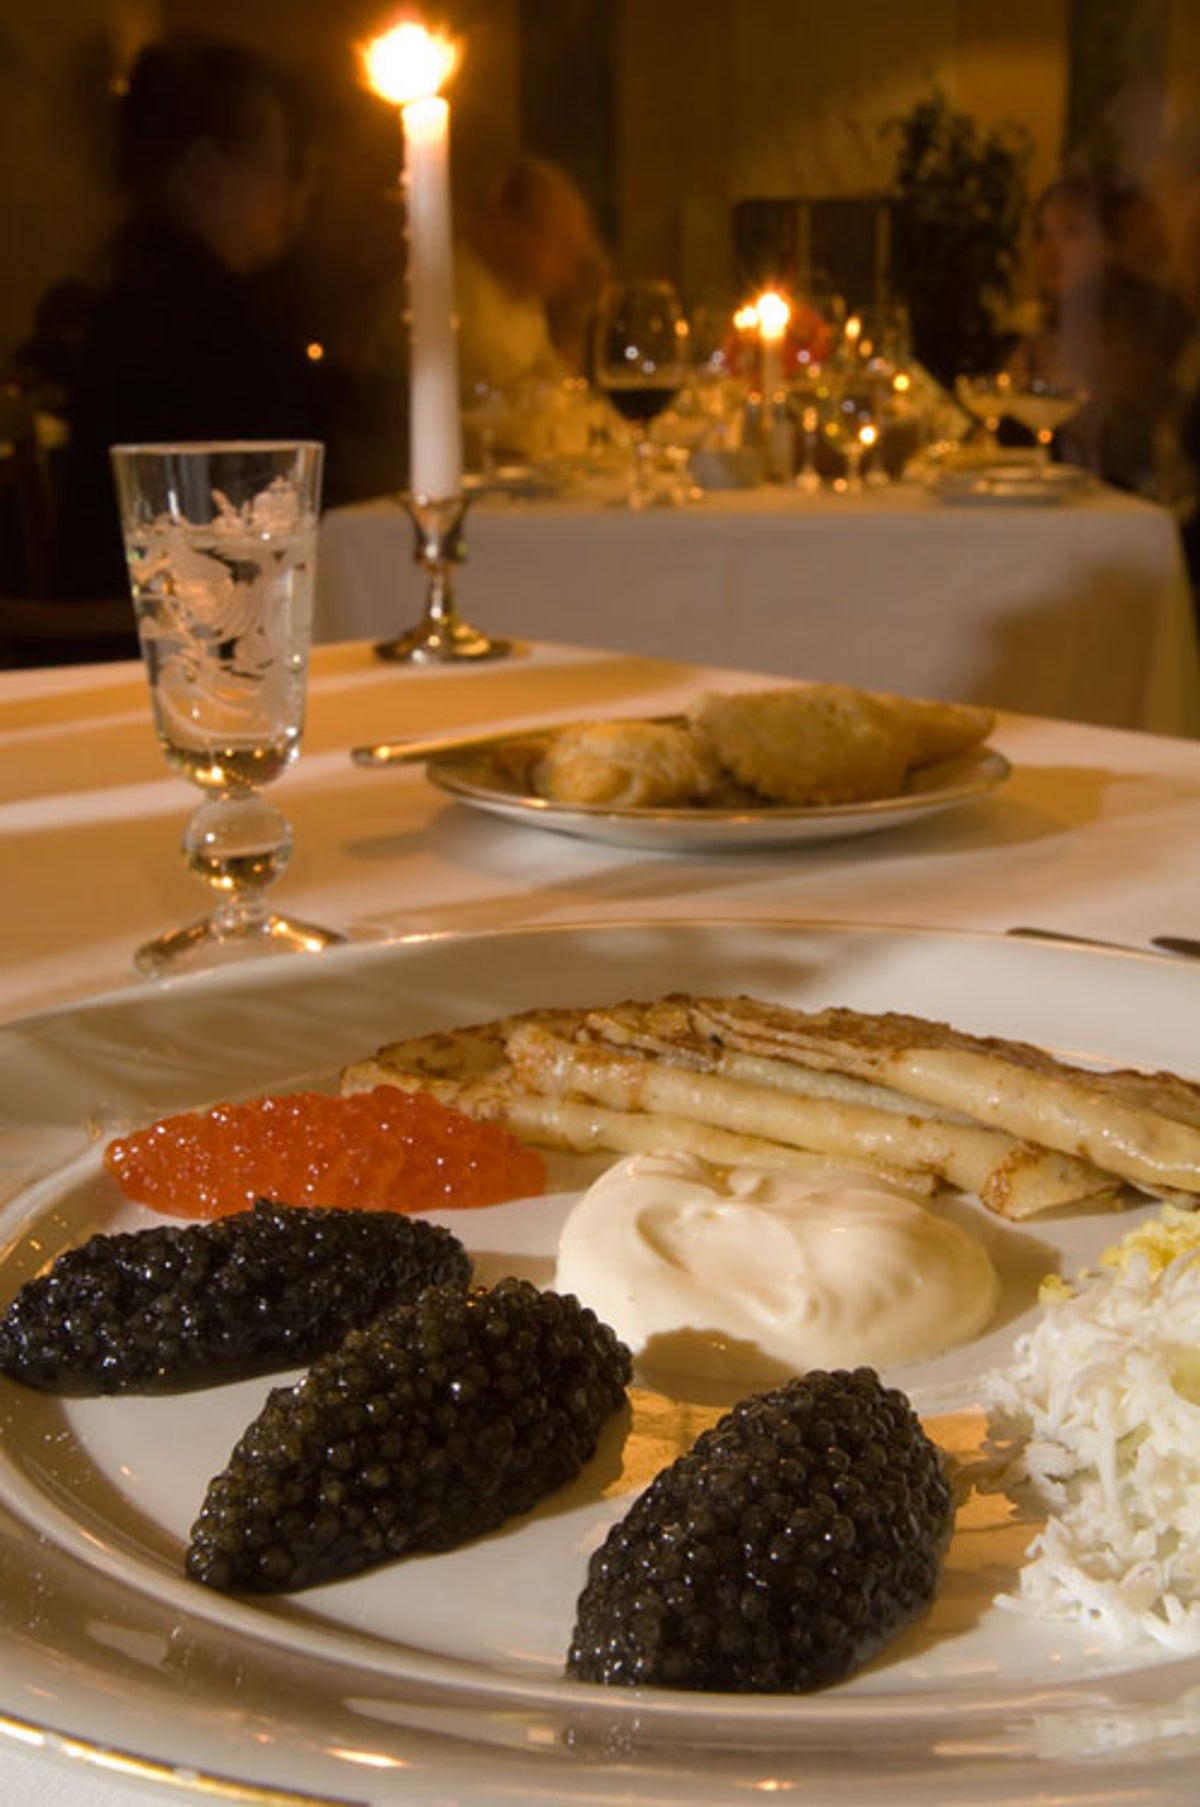 Caviar's growing popularity introduces a new generation to the food